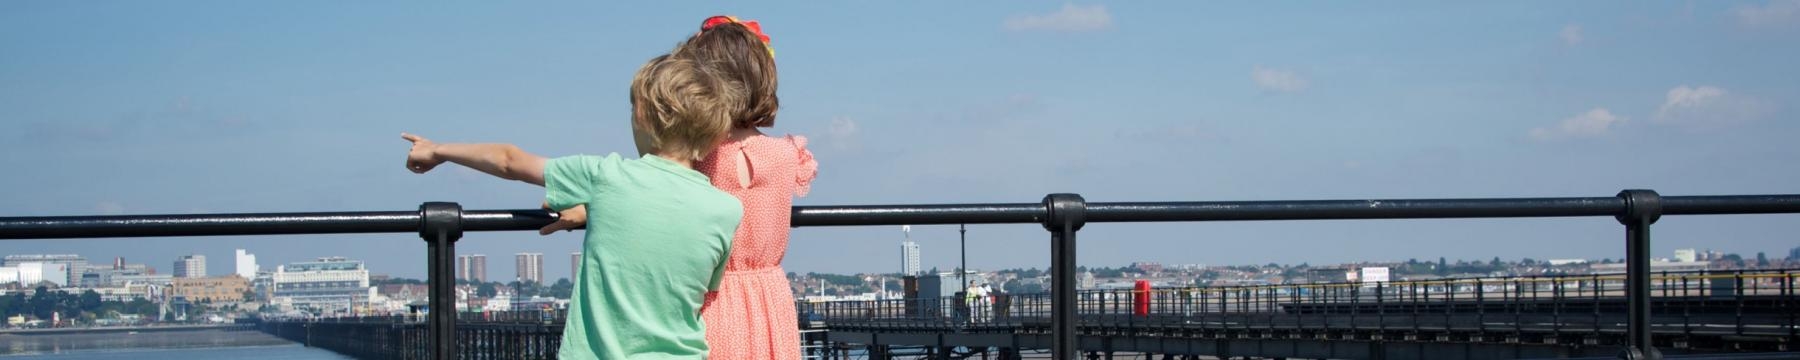 Children looking out from Southend pier